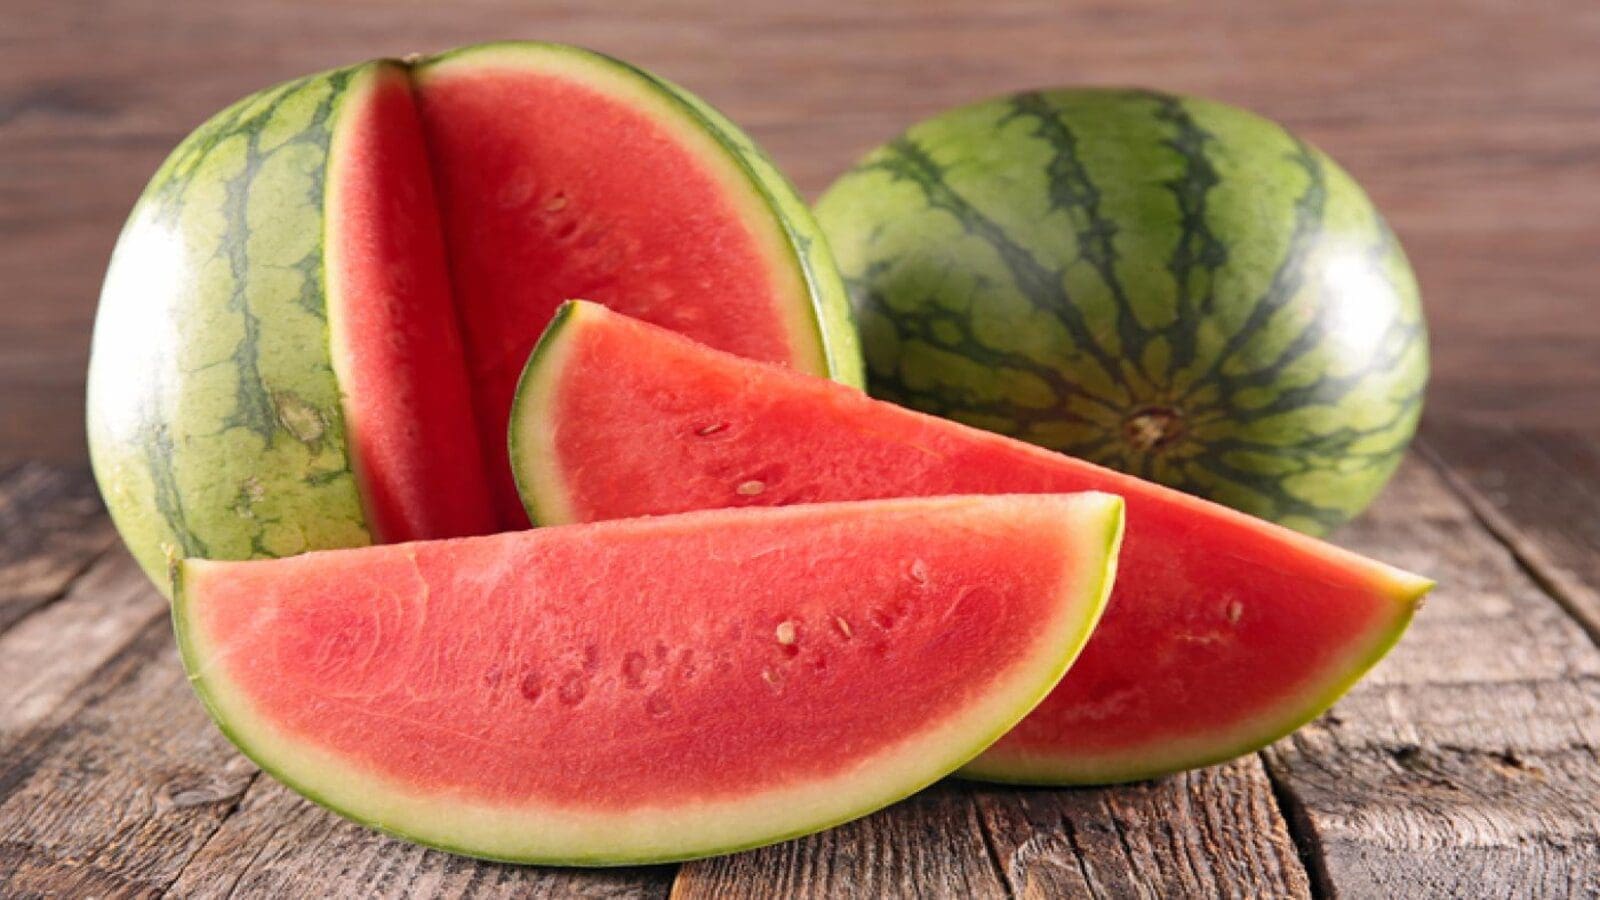 Spain detects unauthorized pesticides residue in watermelon from Morocco